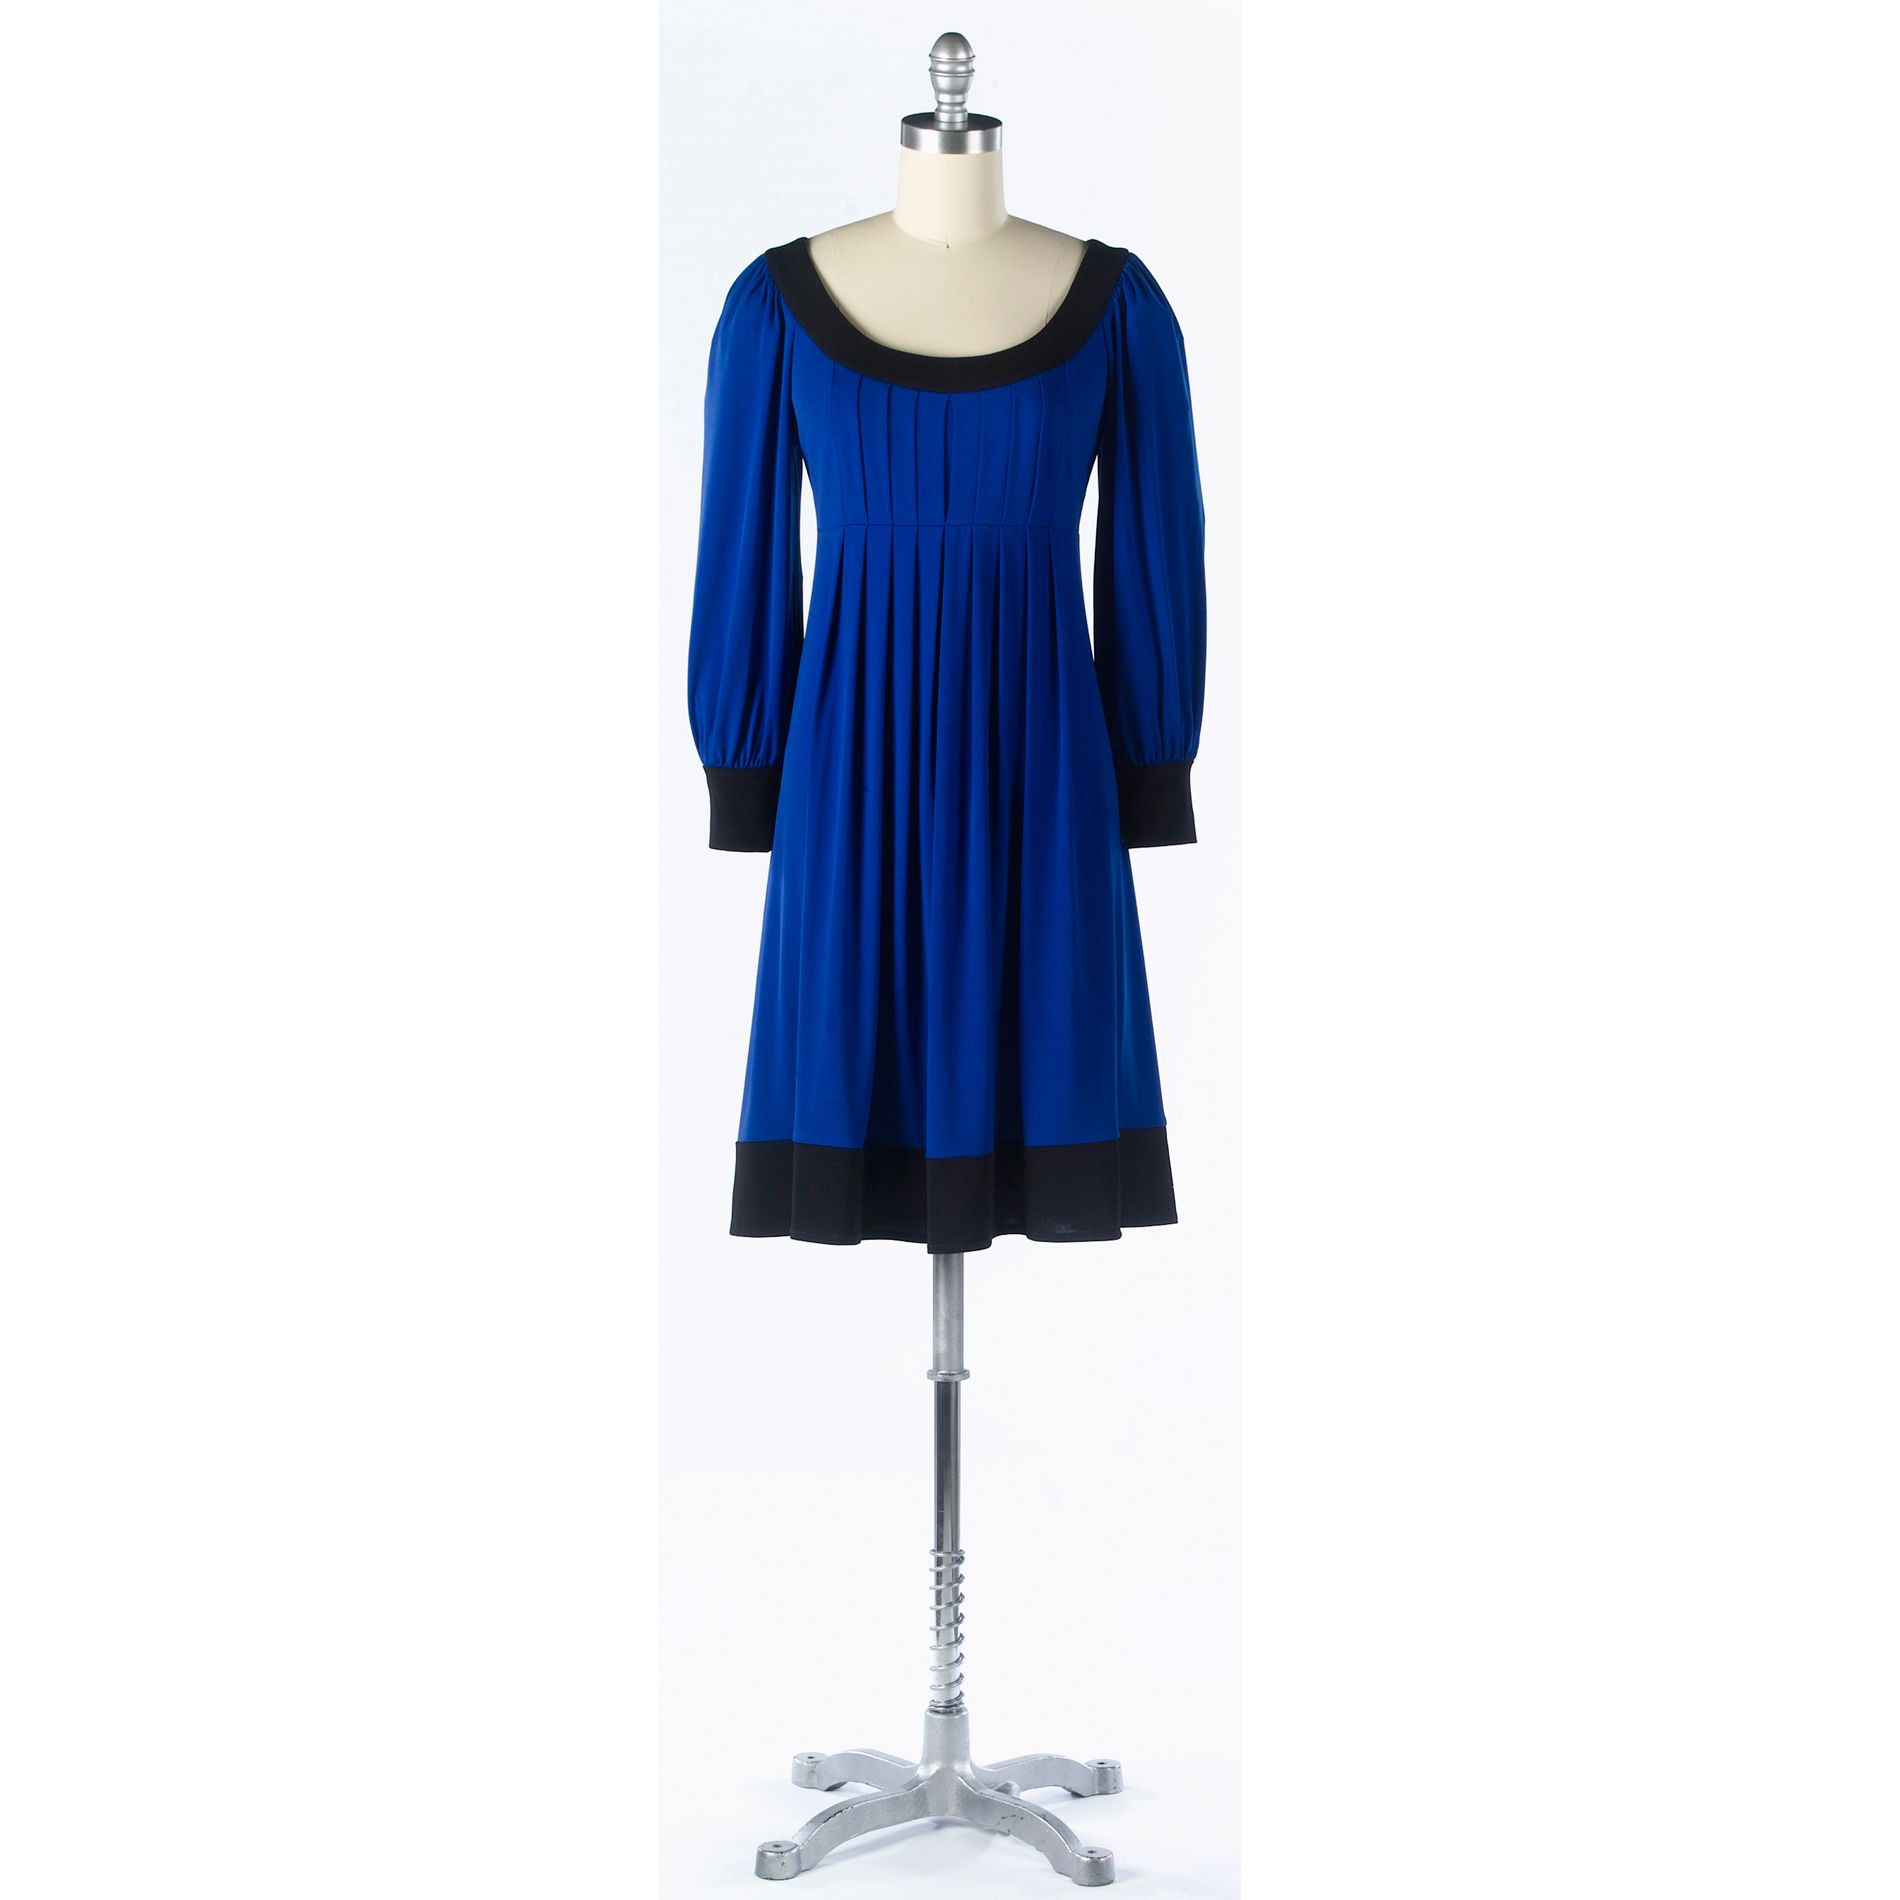 London Style 3/4 Sleeve Boat Neck Colorblock Dress with Empire Waist